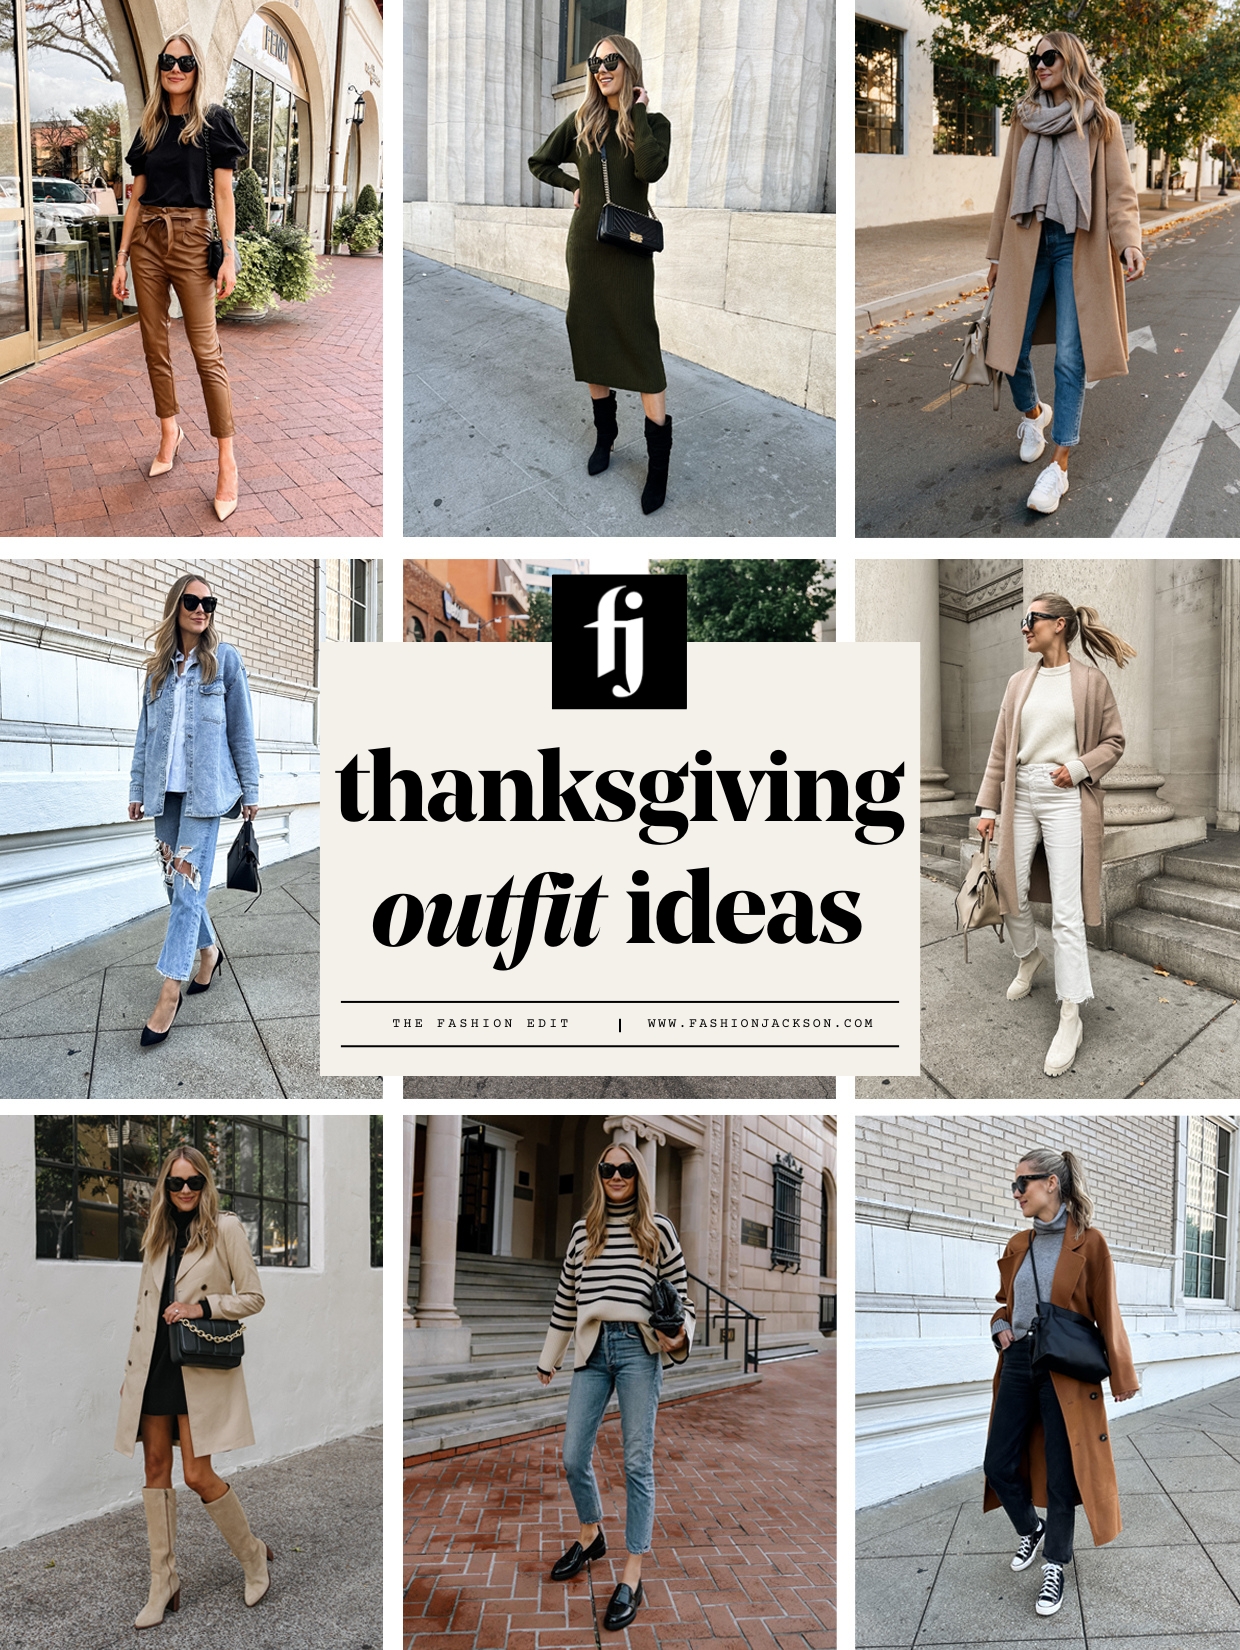 https://fashionjackson.com/wp-content/uploads/2022/11/Thanksgiving-Outfit-Ideas-Featured-Image.jpg